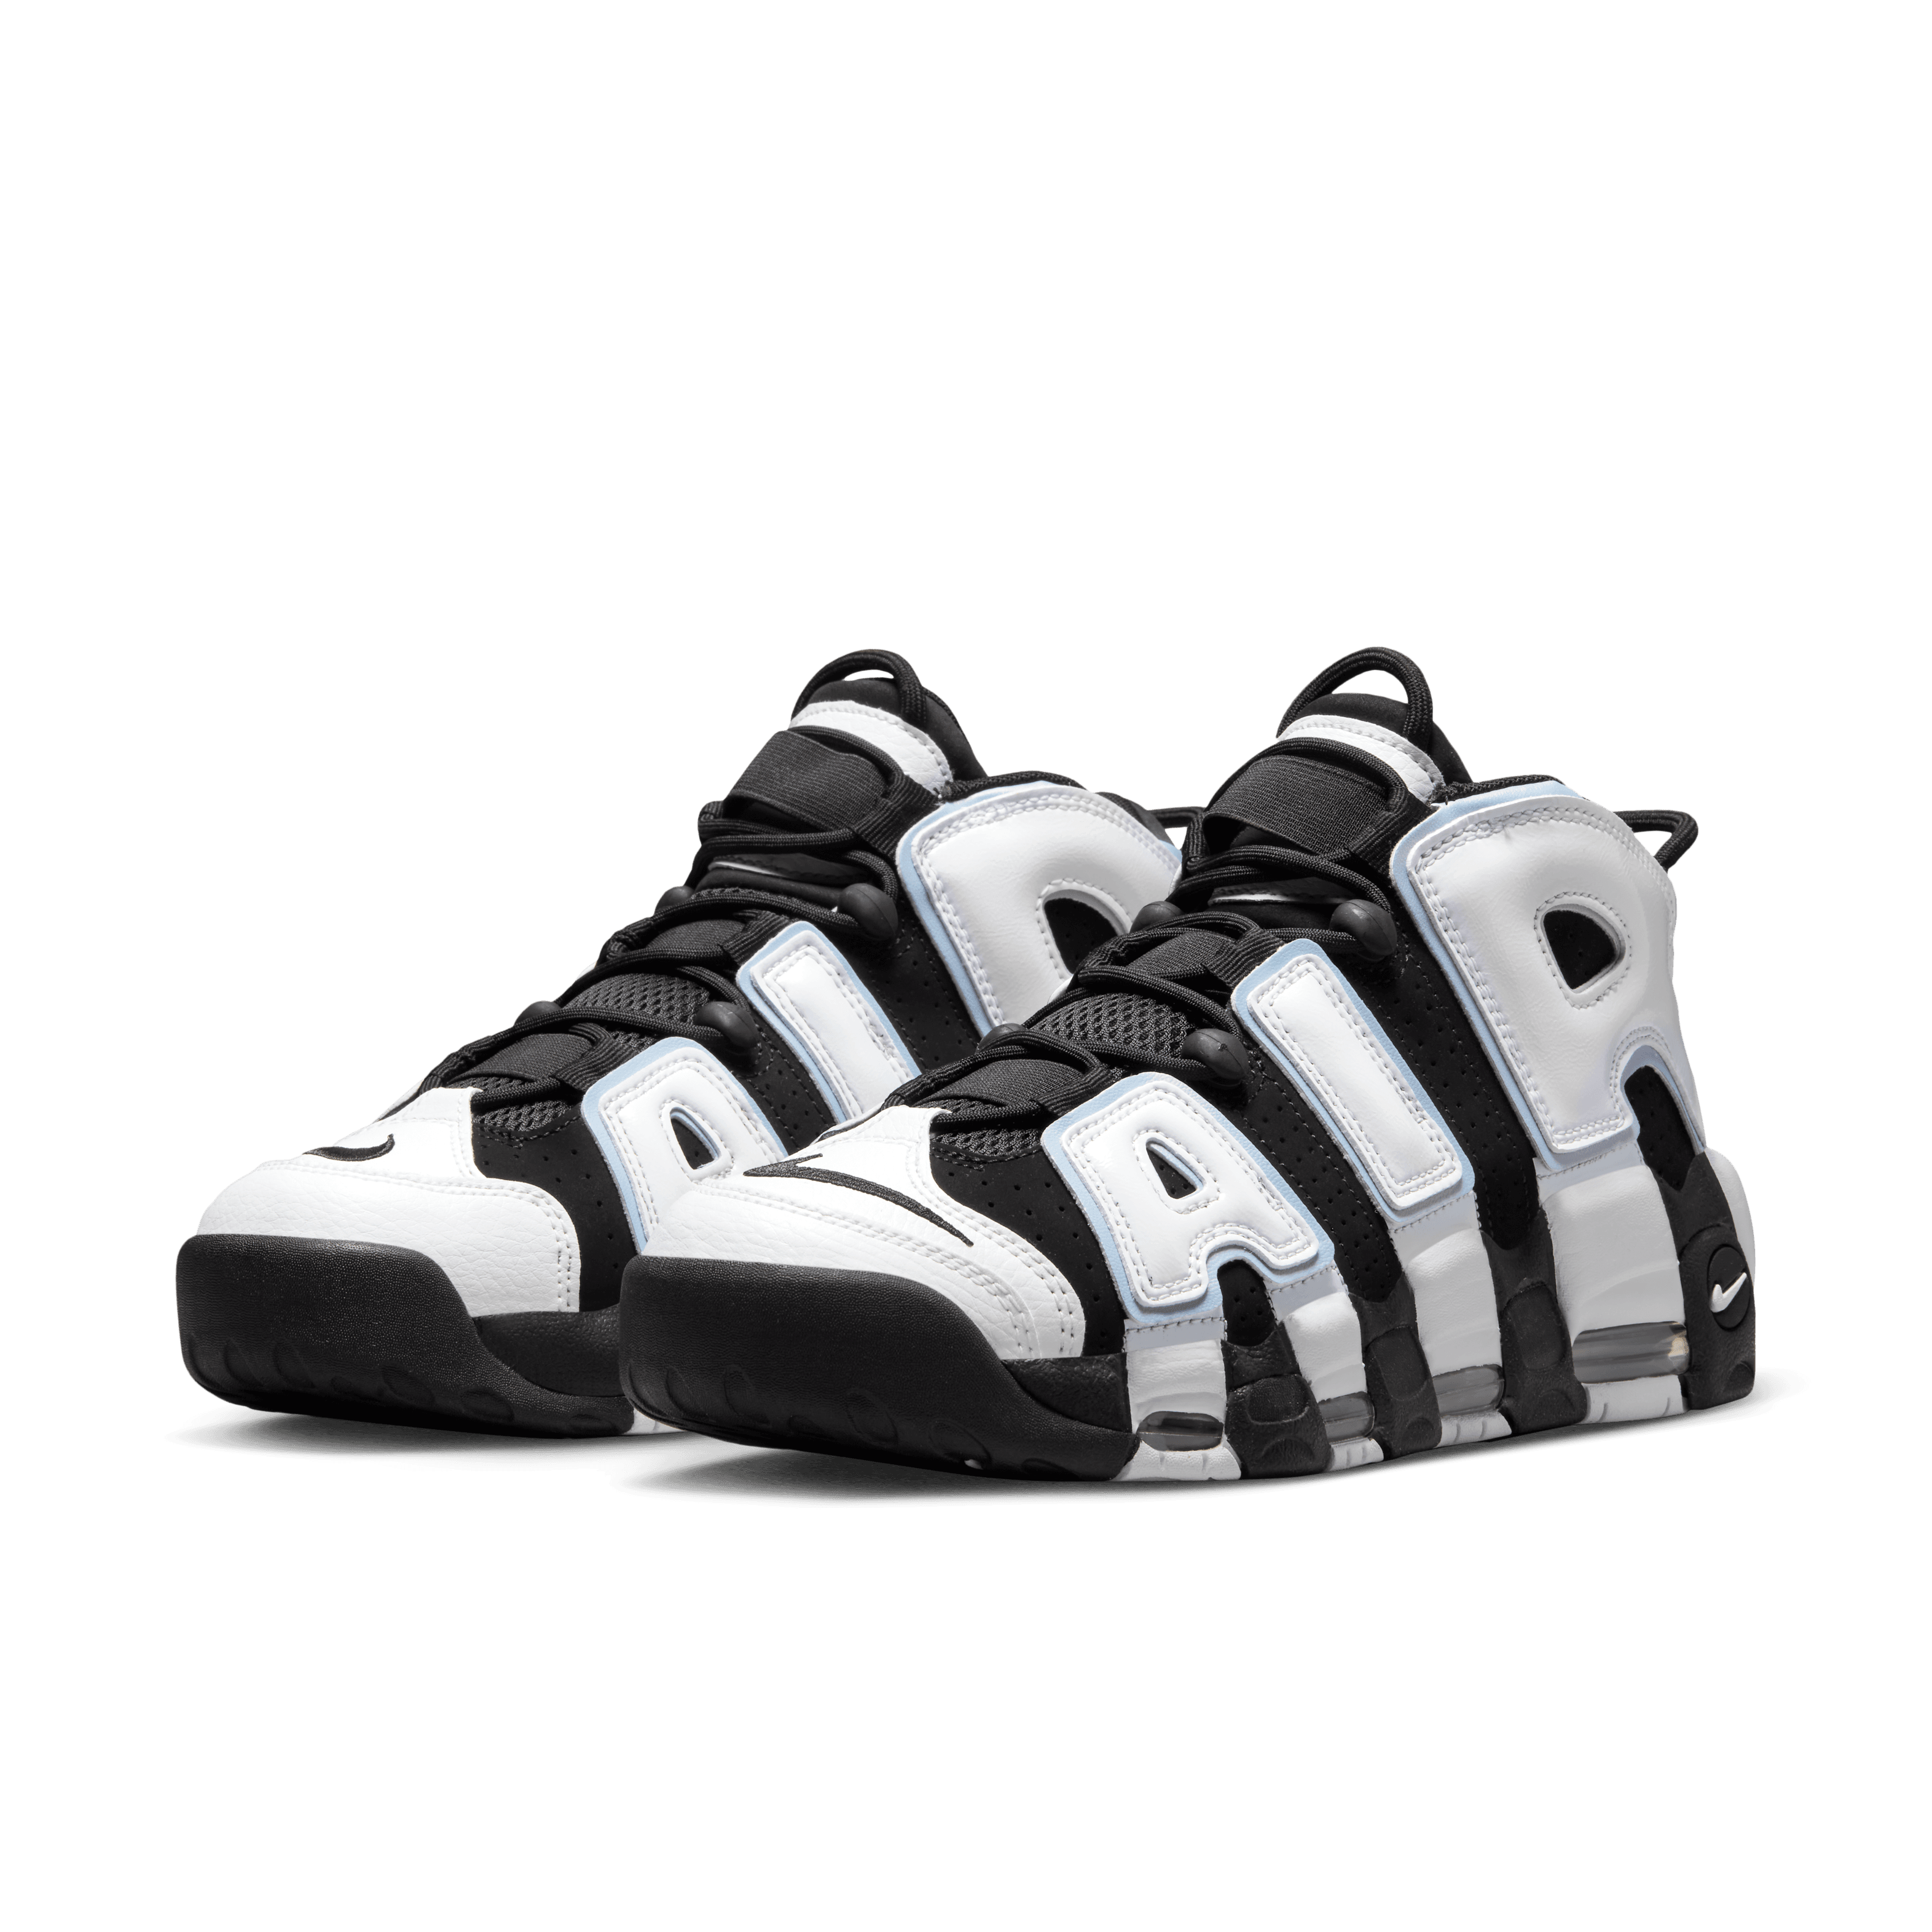 Before & After! 2 Small Changes To These Nike Air More Uptempo 96! 